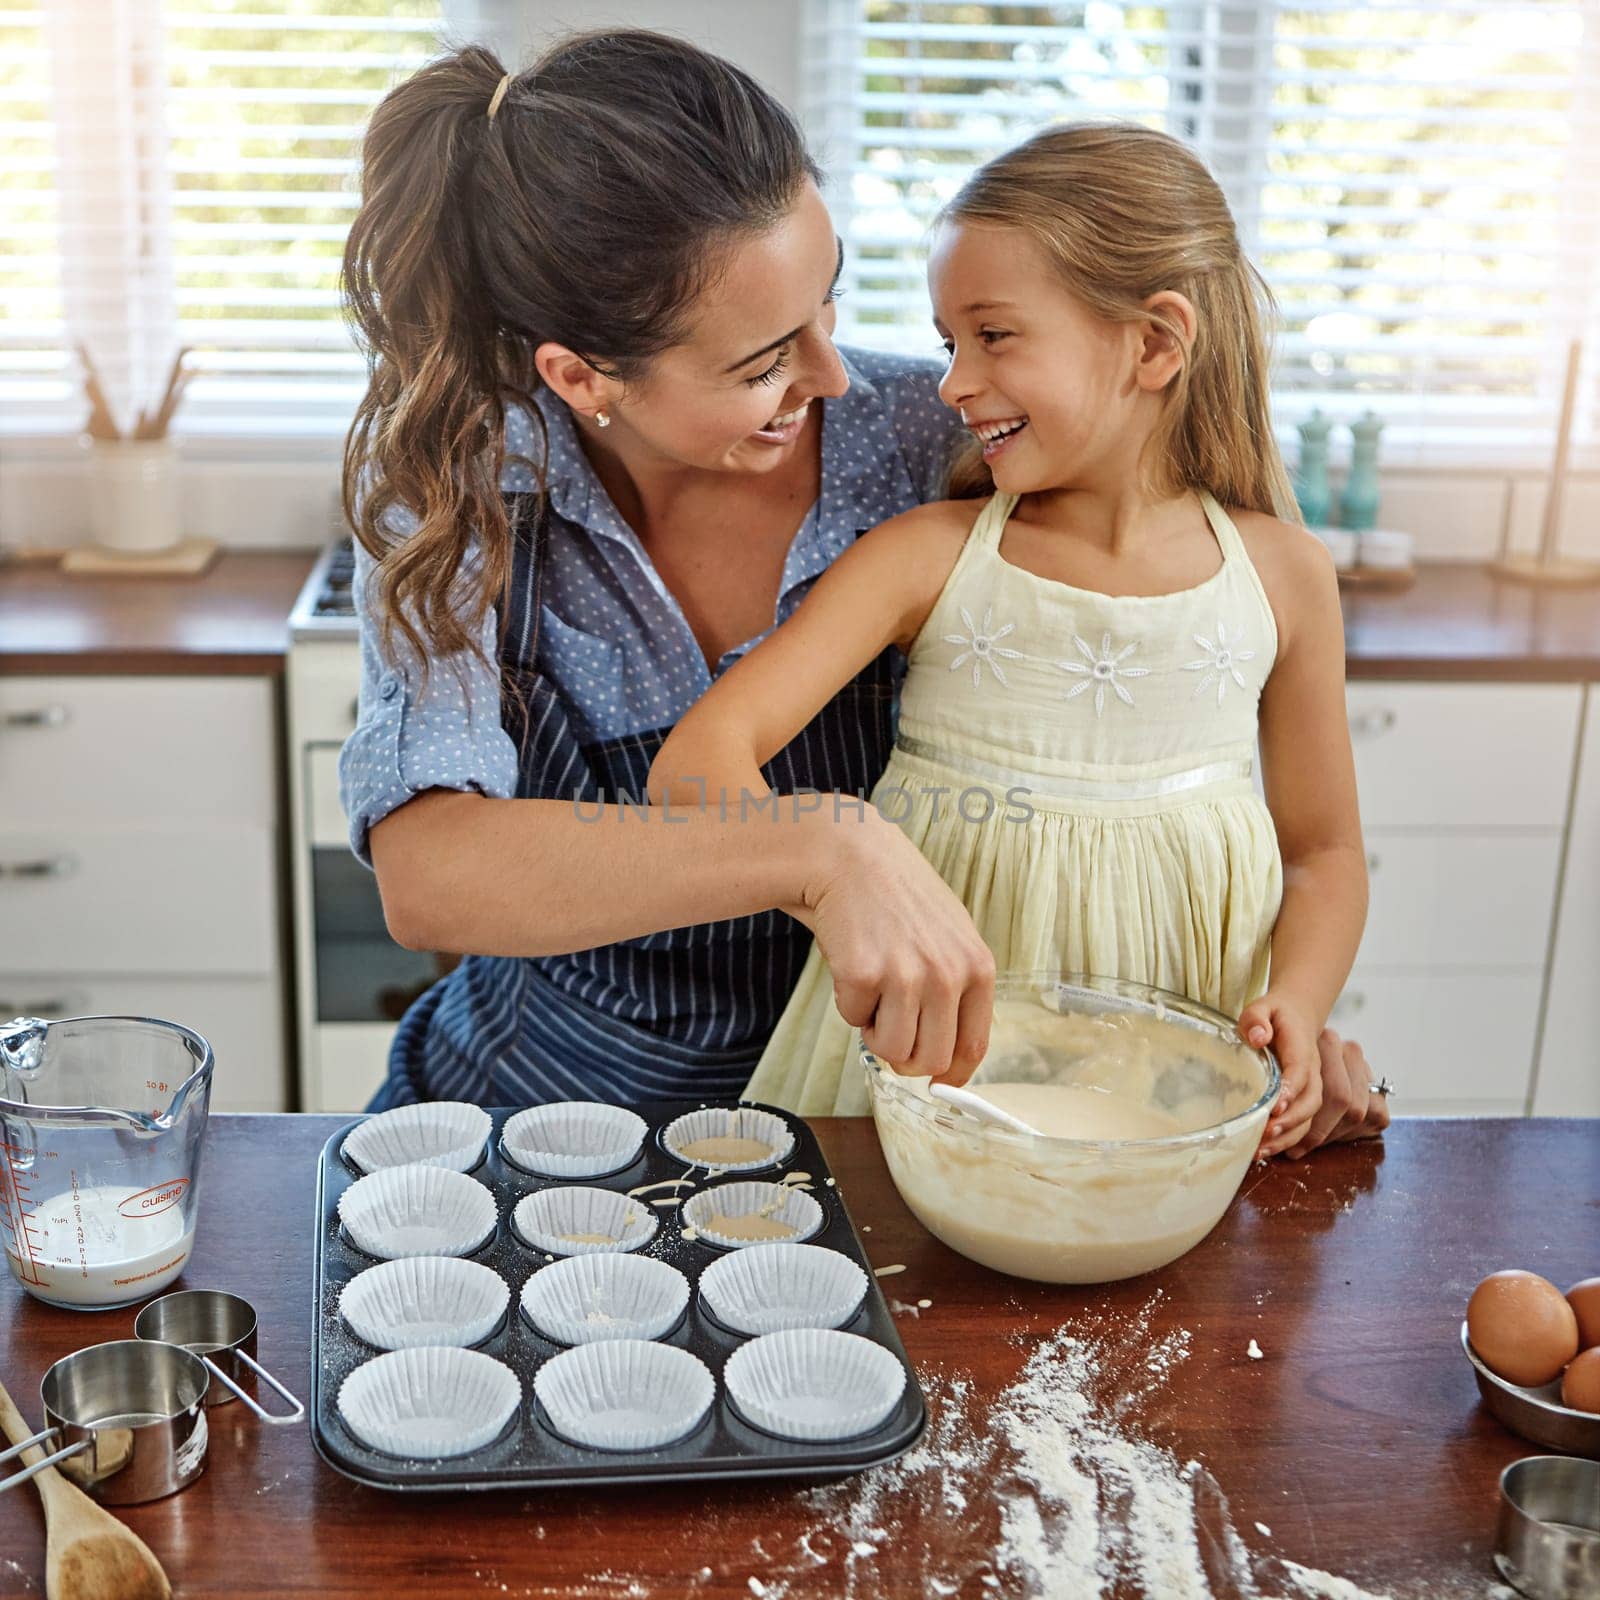 My favorite thing to do is bake with my mom. a mother and her daughter baking in the kitchen